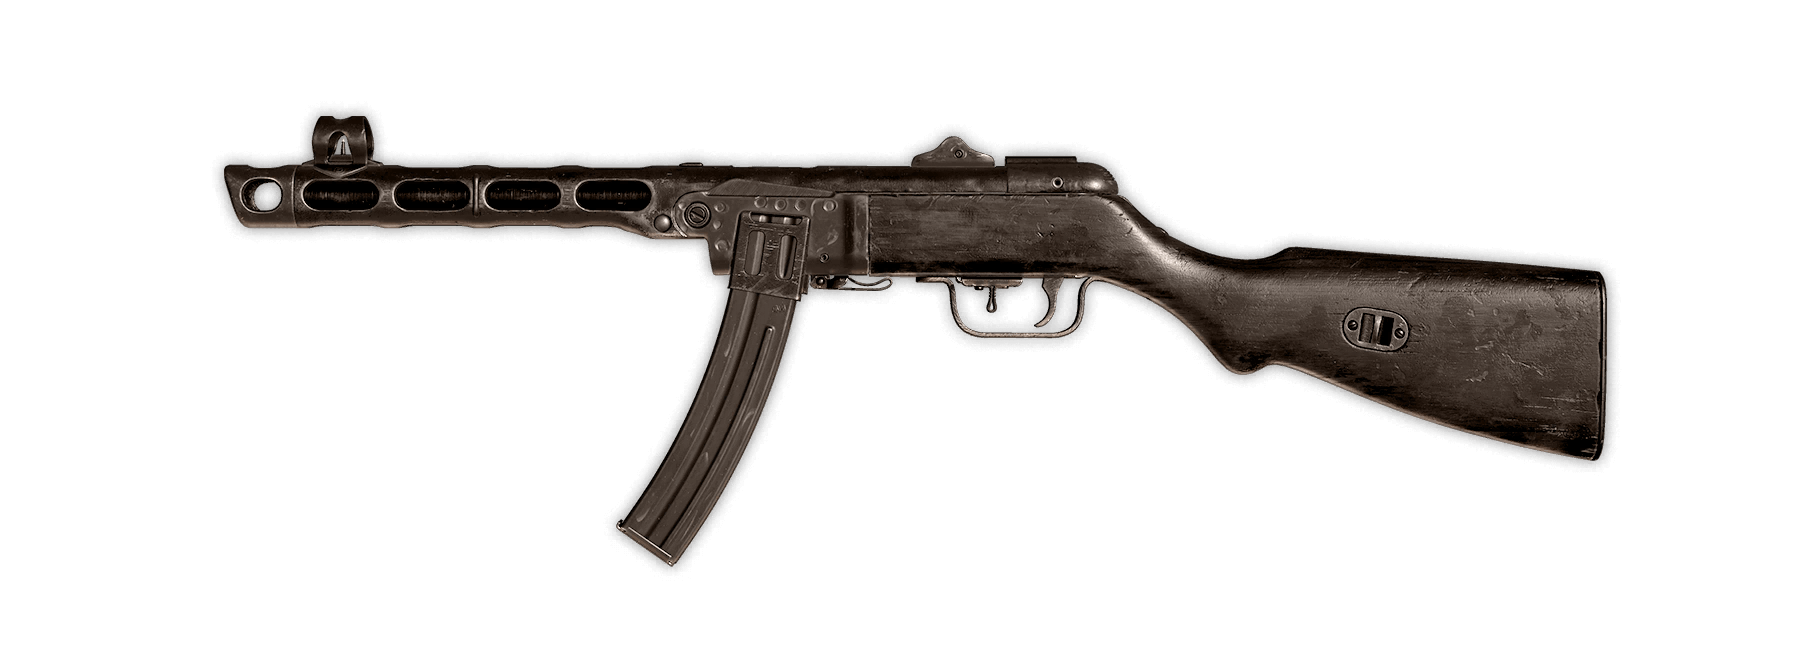 Image of PPSh-41